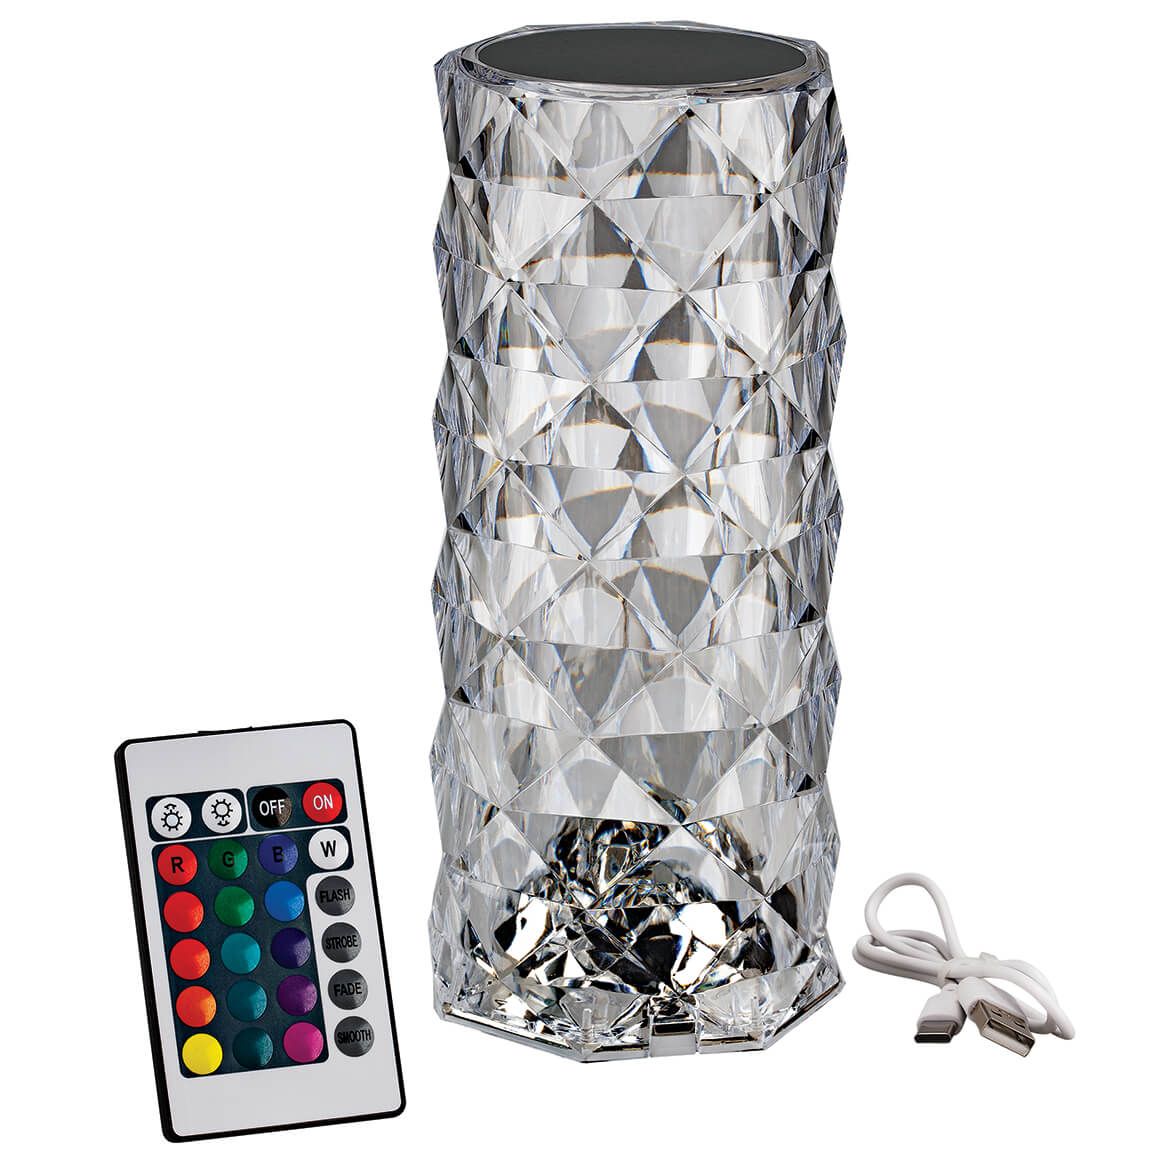 Crystal Rose LED Table Lamp With Remote + '-' + 375606